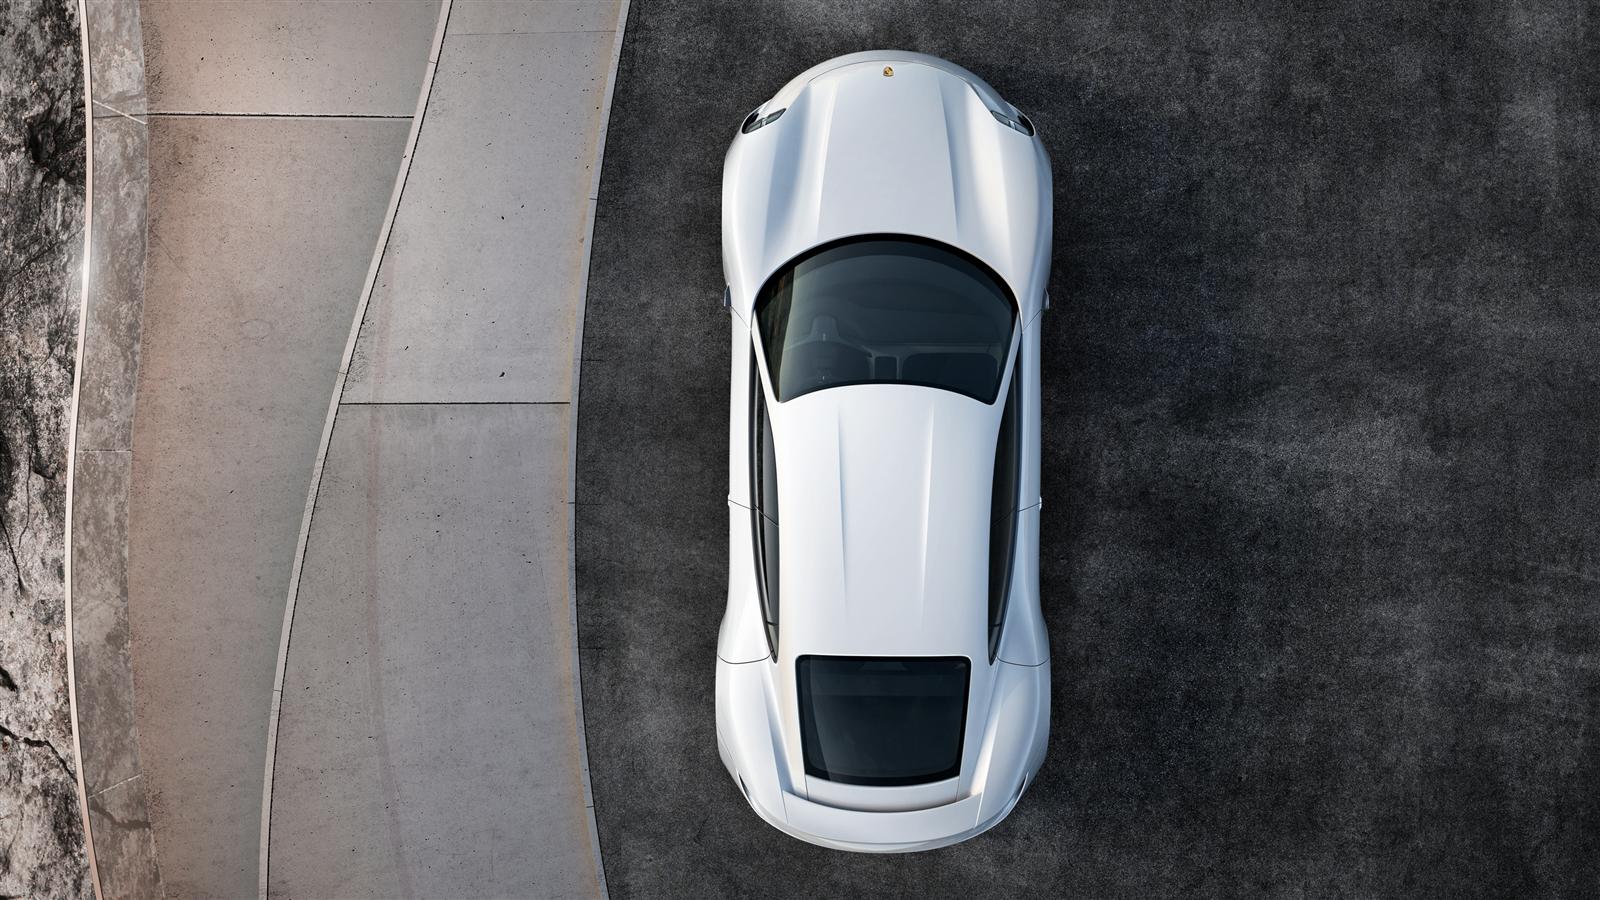 Porsche's Mission E white color view from top 4k ultra hd image